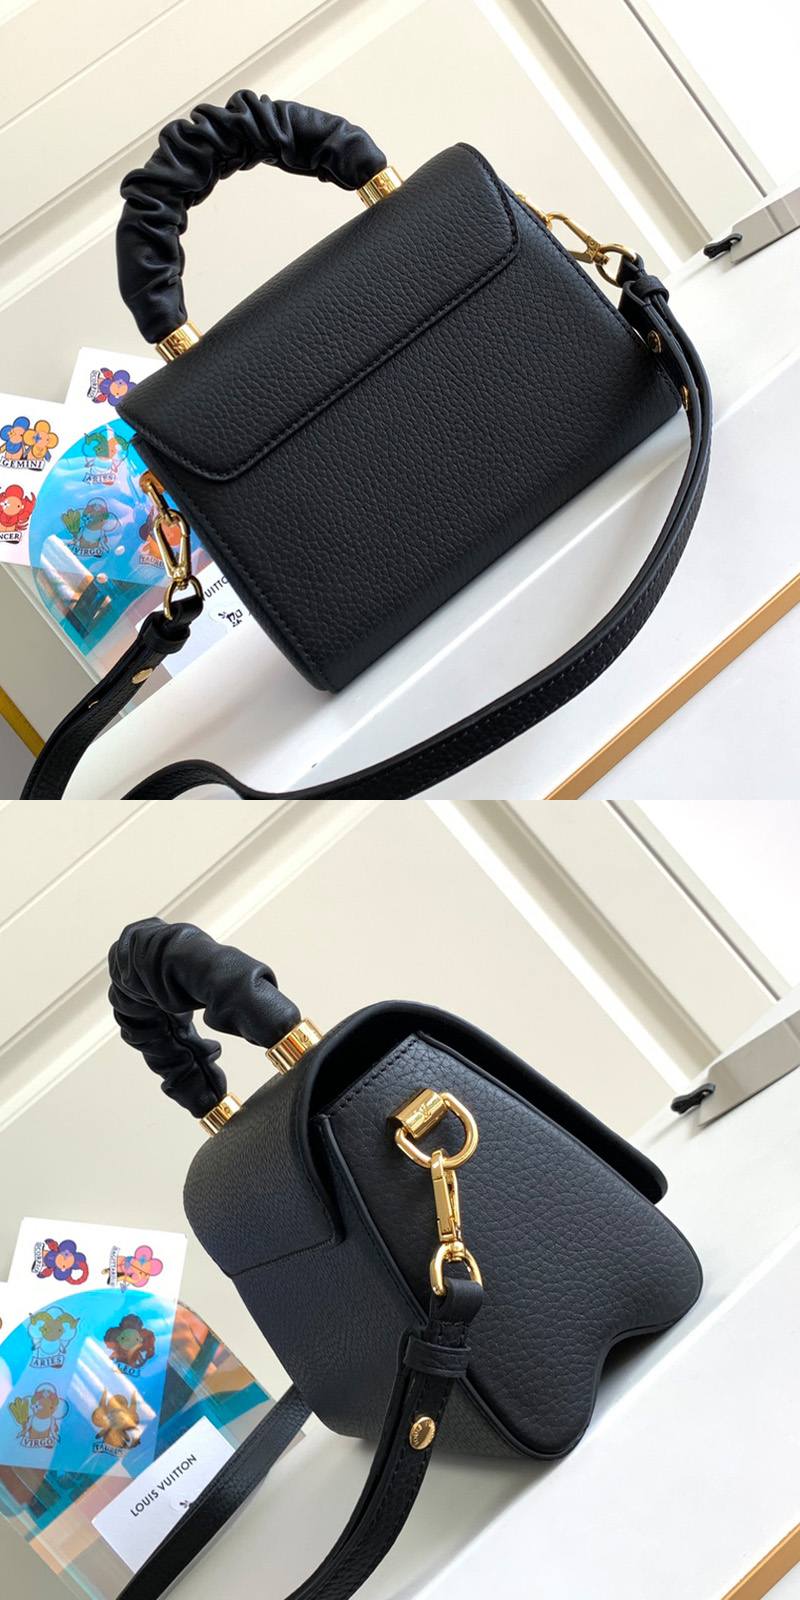 How much is the cheap LV Twist bag at the counter on the official website?